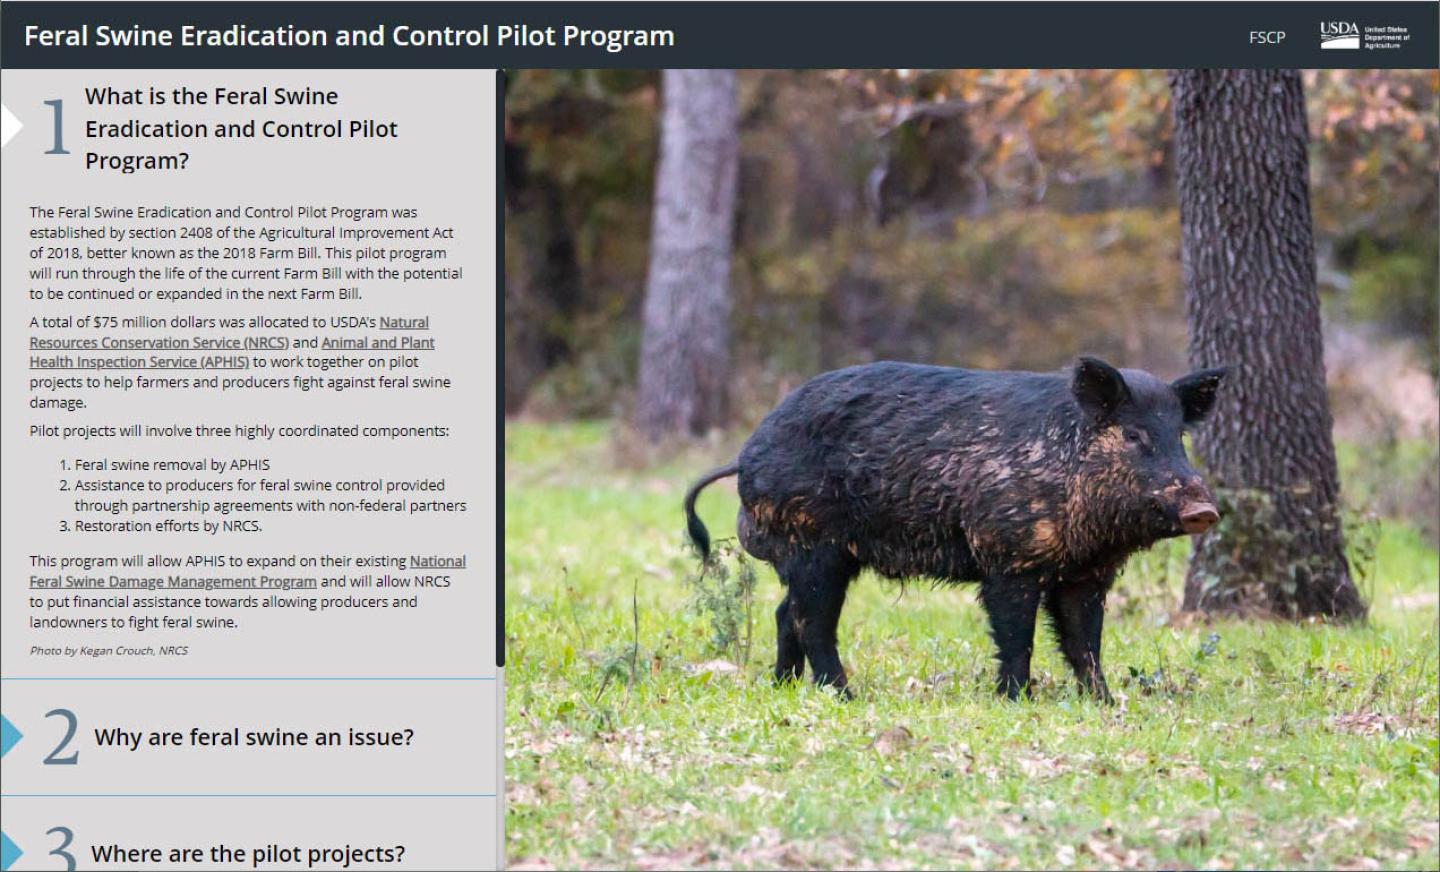 ARCGIS Feral Swine Eradication Storymap Screenshot showing mud-covered feral swine, and three content sections: what the program is, why feral swine are an issue, where pilot projects are